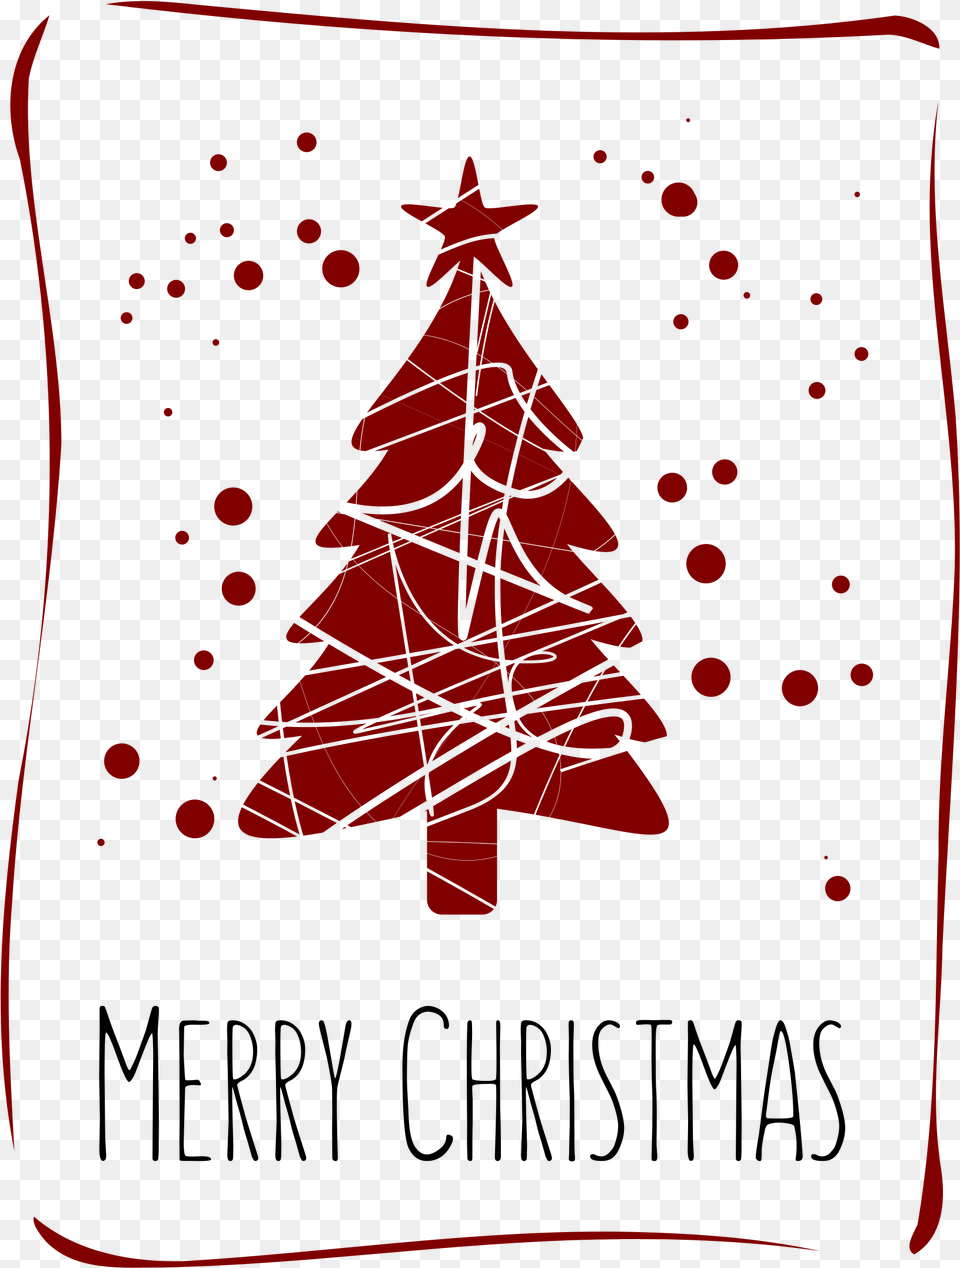 Christmas Card Design Clip Arts Christmas Card Designs, Person, Christmas Decorations, Festival, Christmas Tree Free Png Download